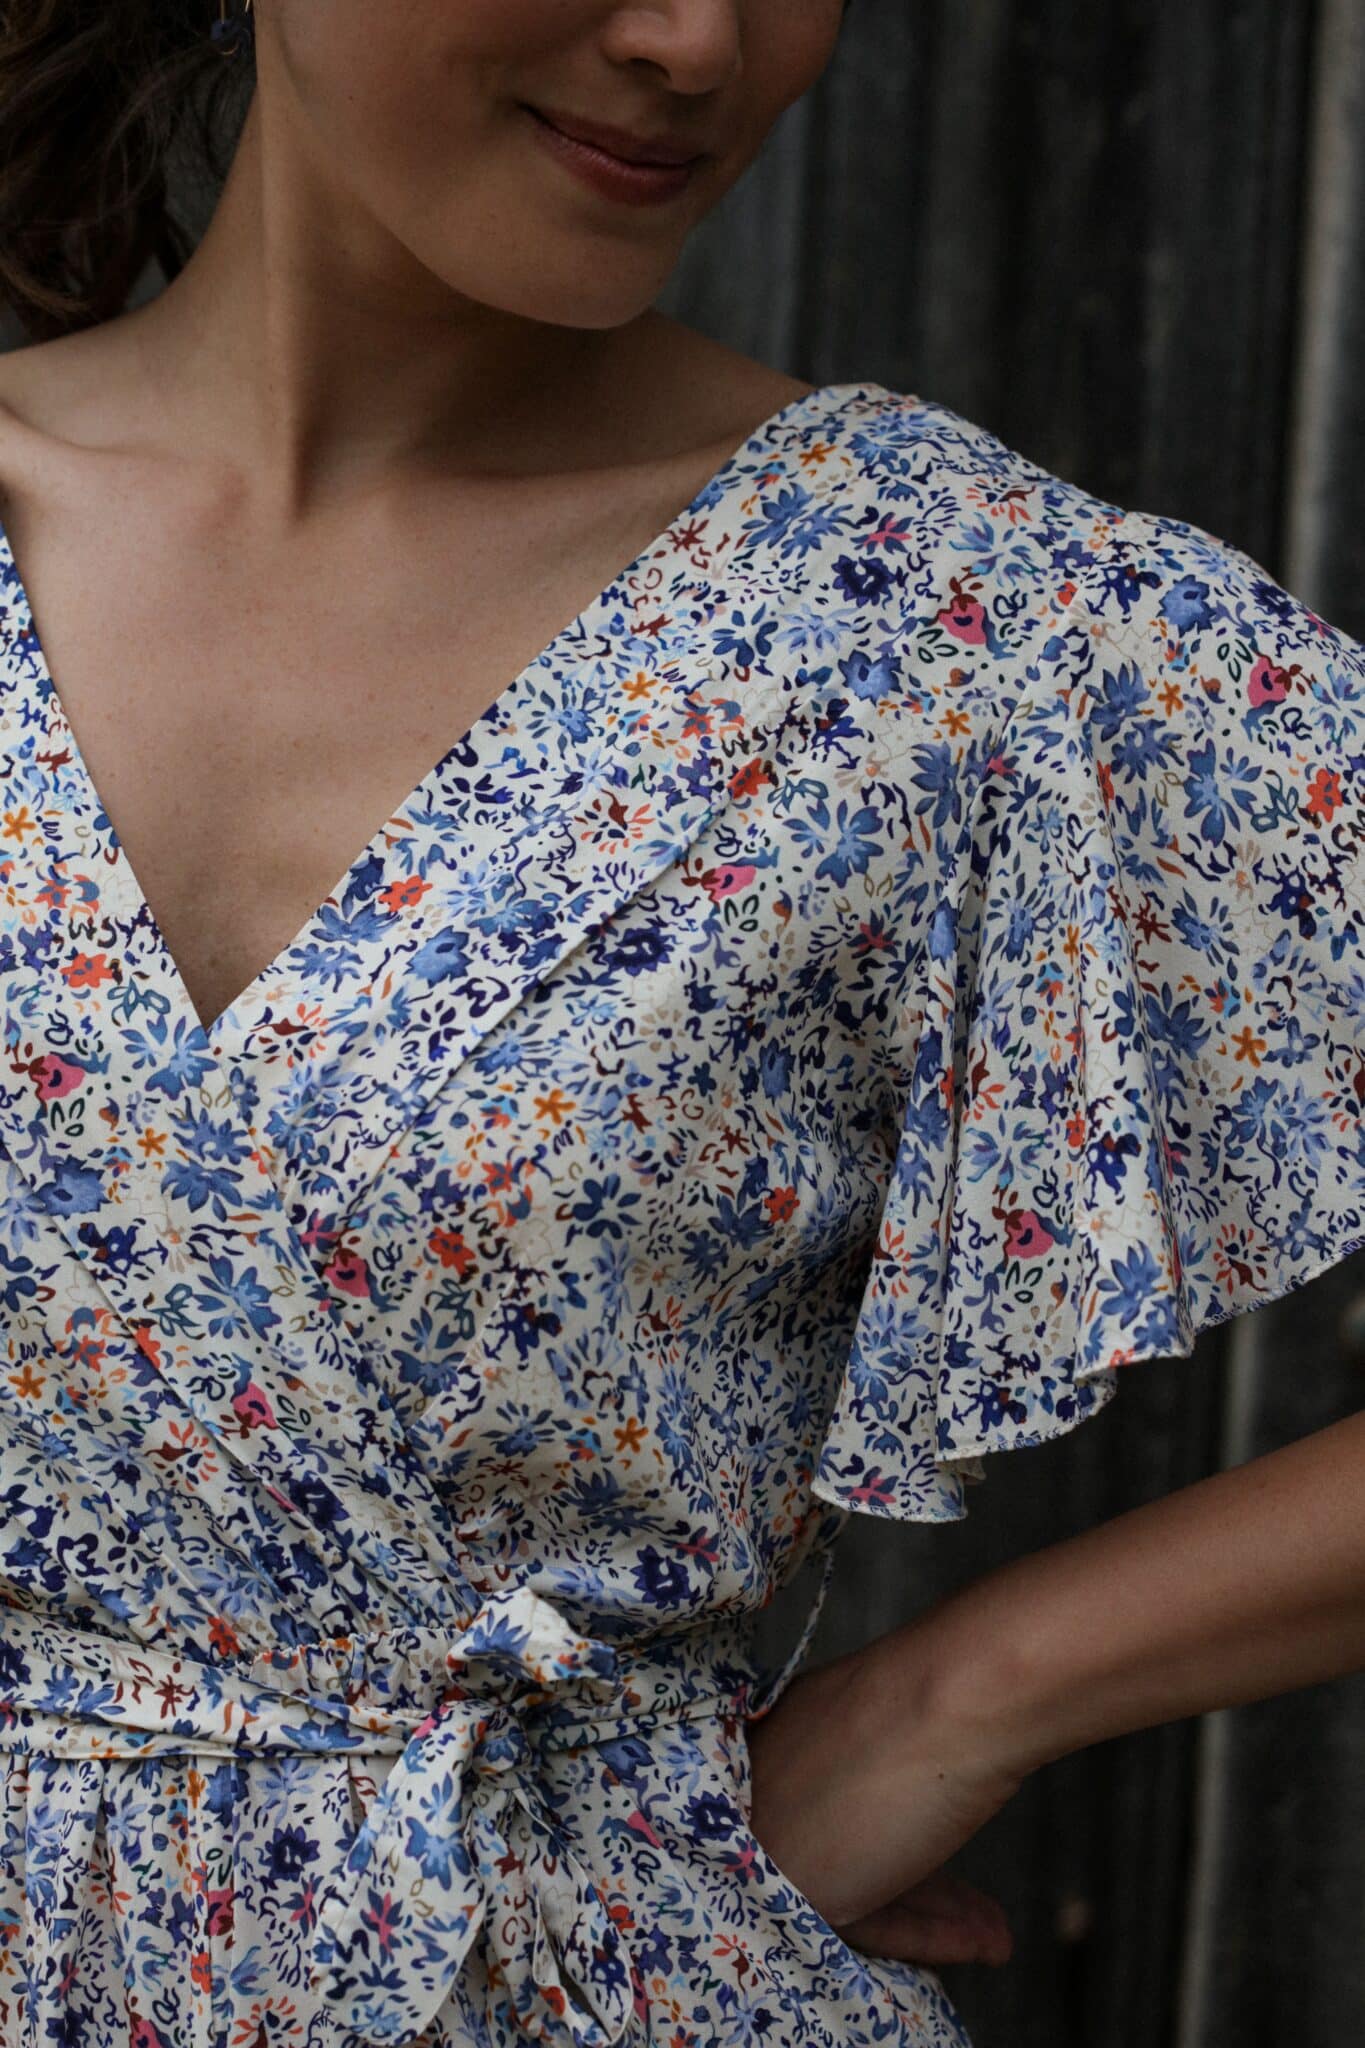 Shooting model wearing our floral jumpsuit Butterfly sleeves blue jeans current zoomed